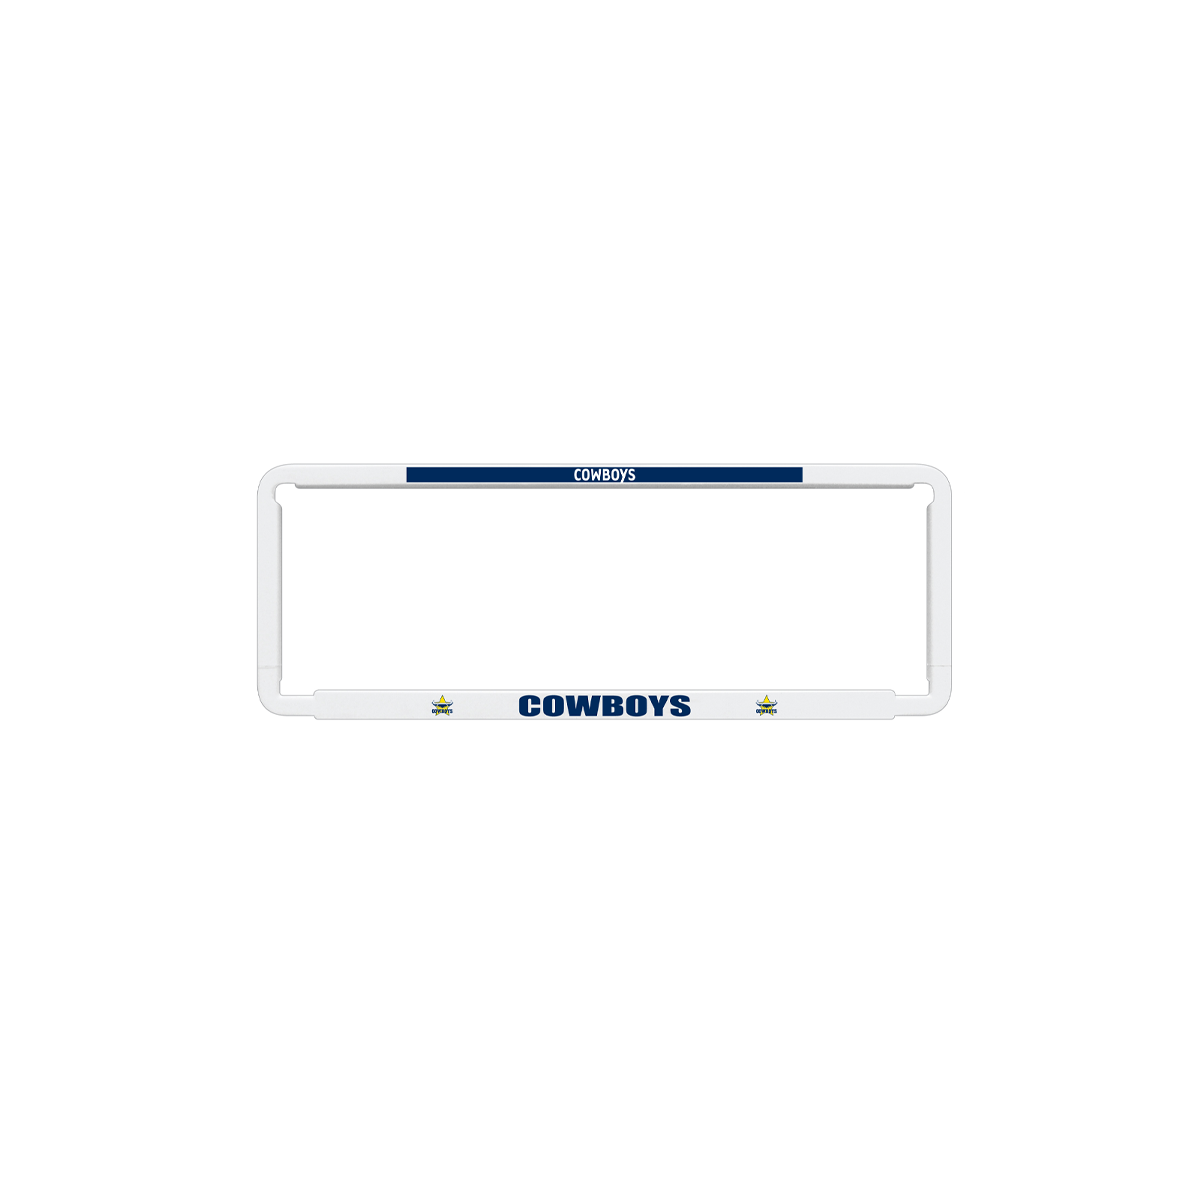 North Queensland Cowboys NRL Number Plate Cover